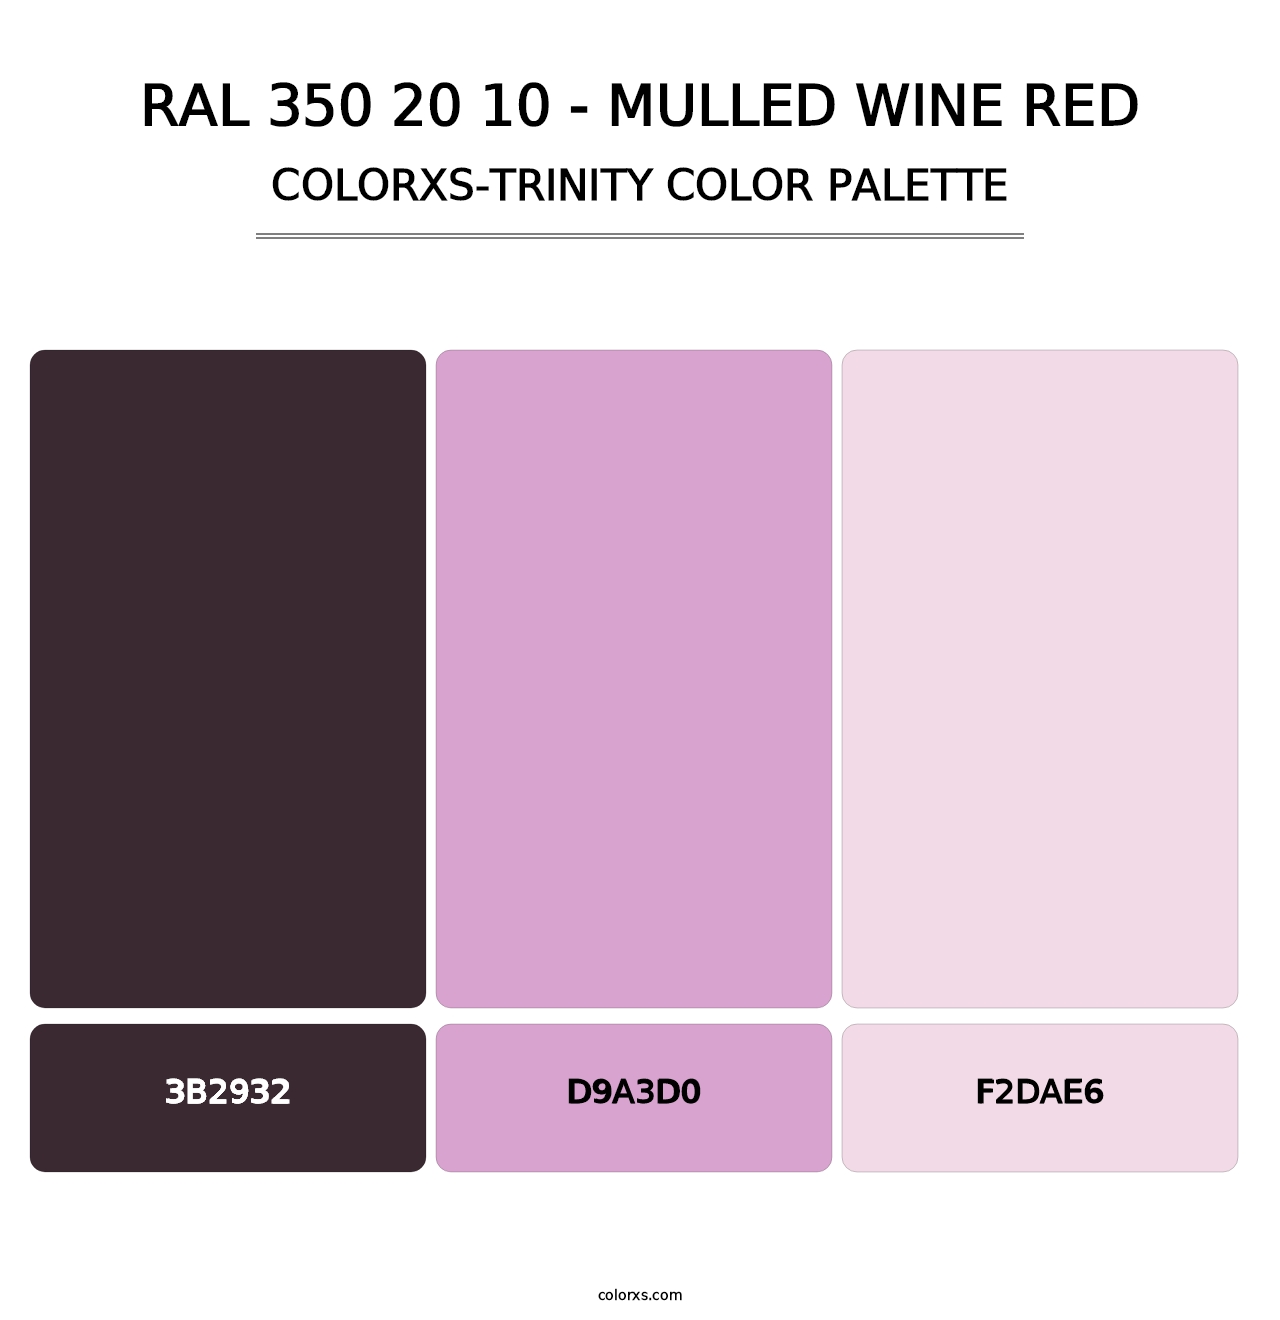 RAL 350 20 10 - Mulled Wine Red - Colorxs Trinity Palette